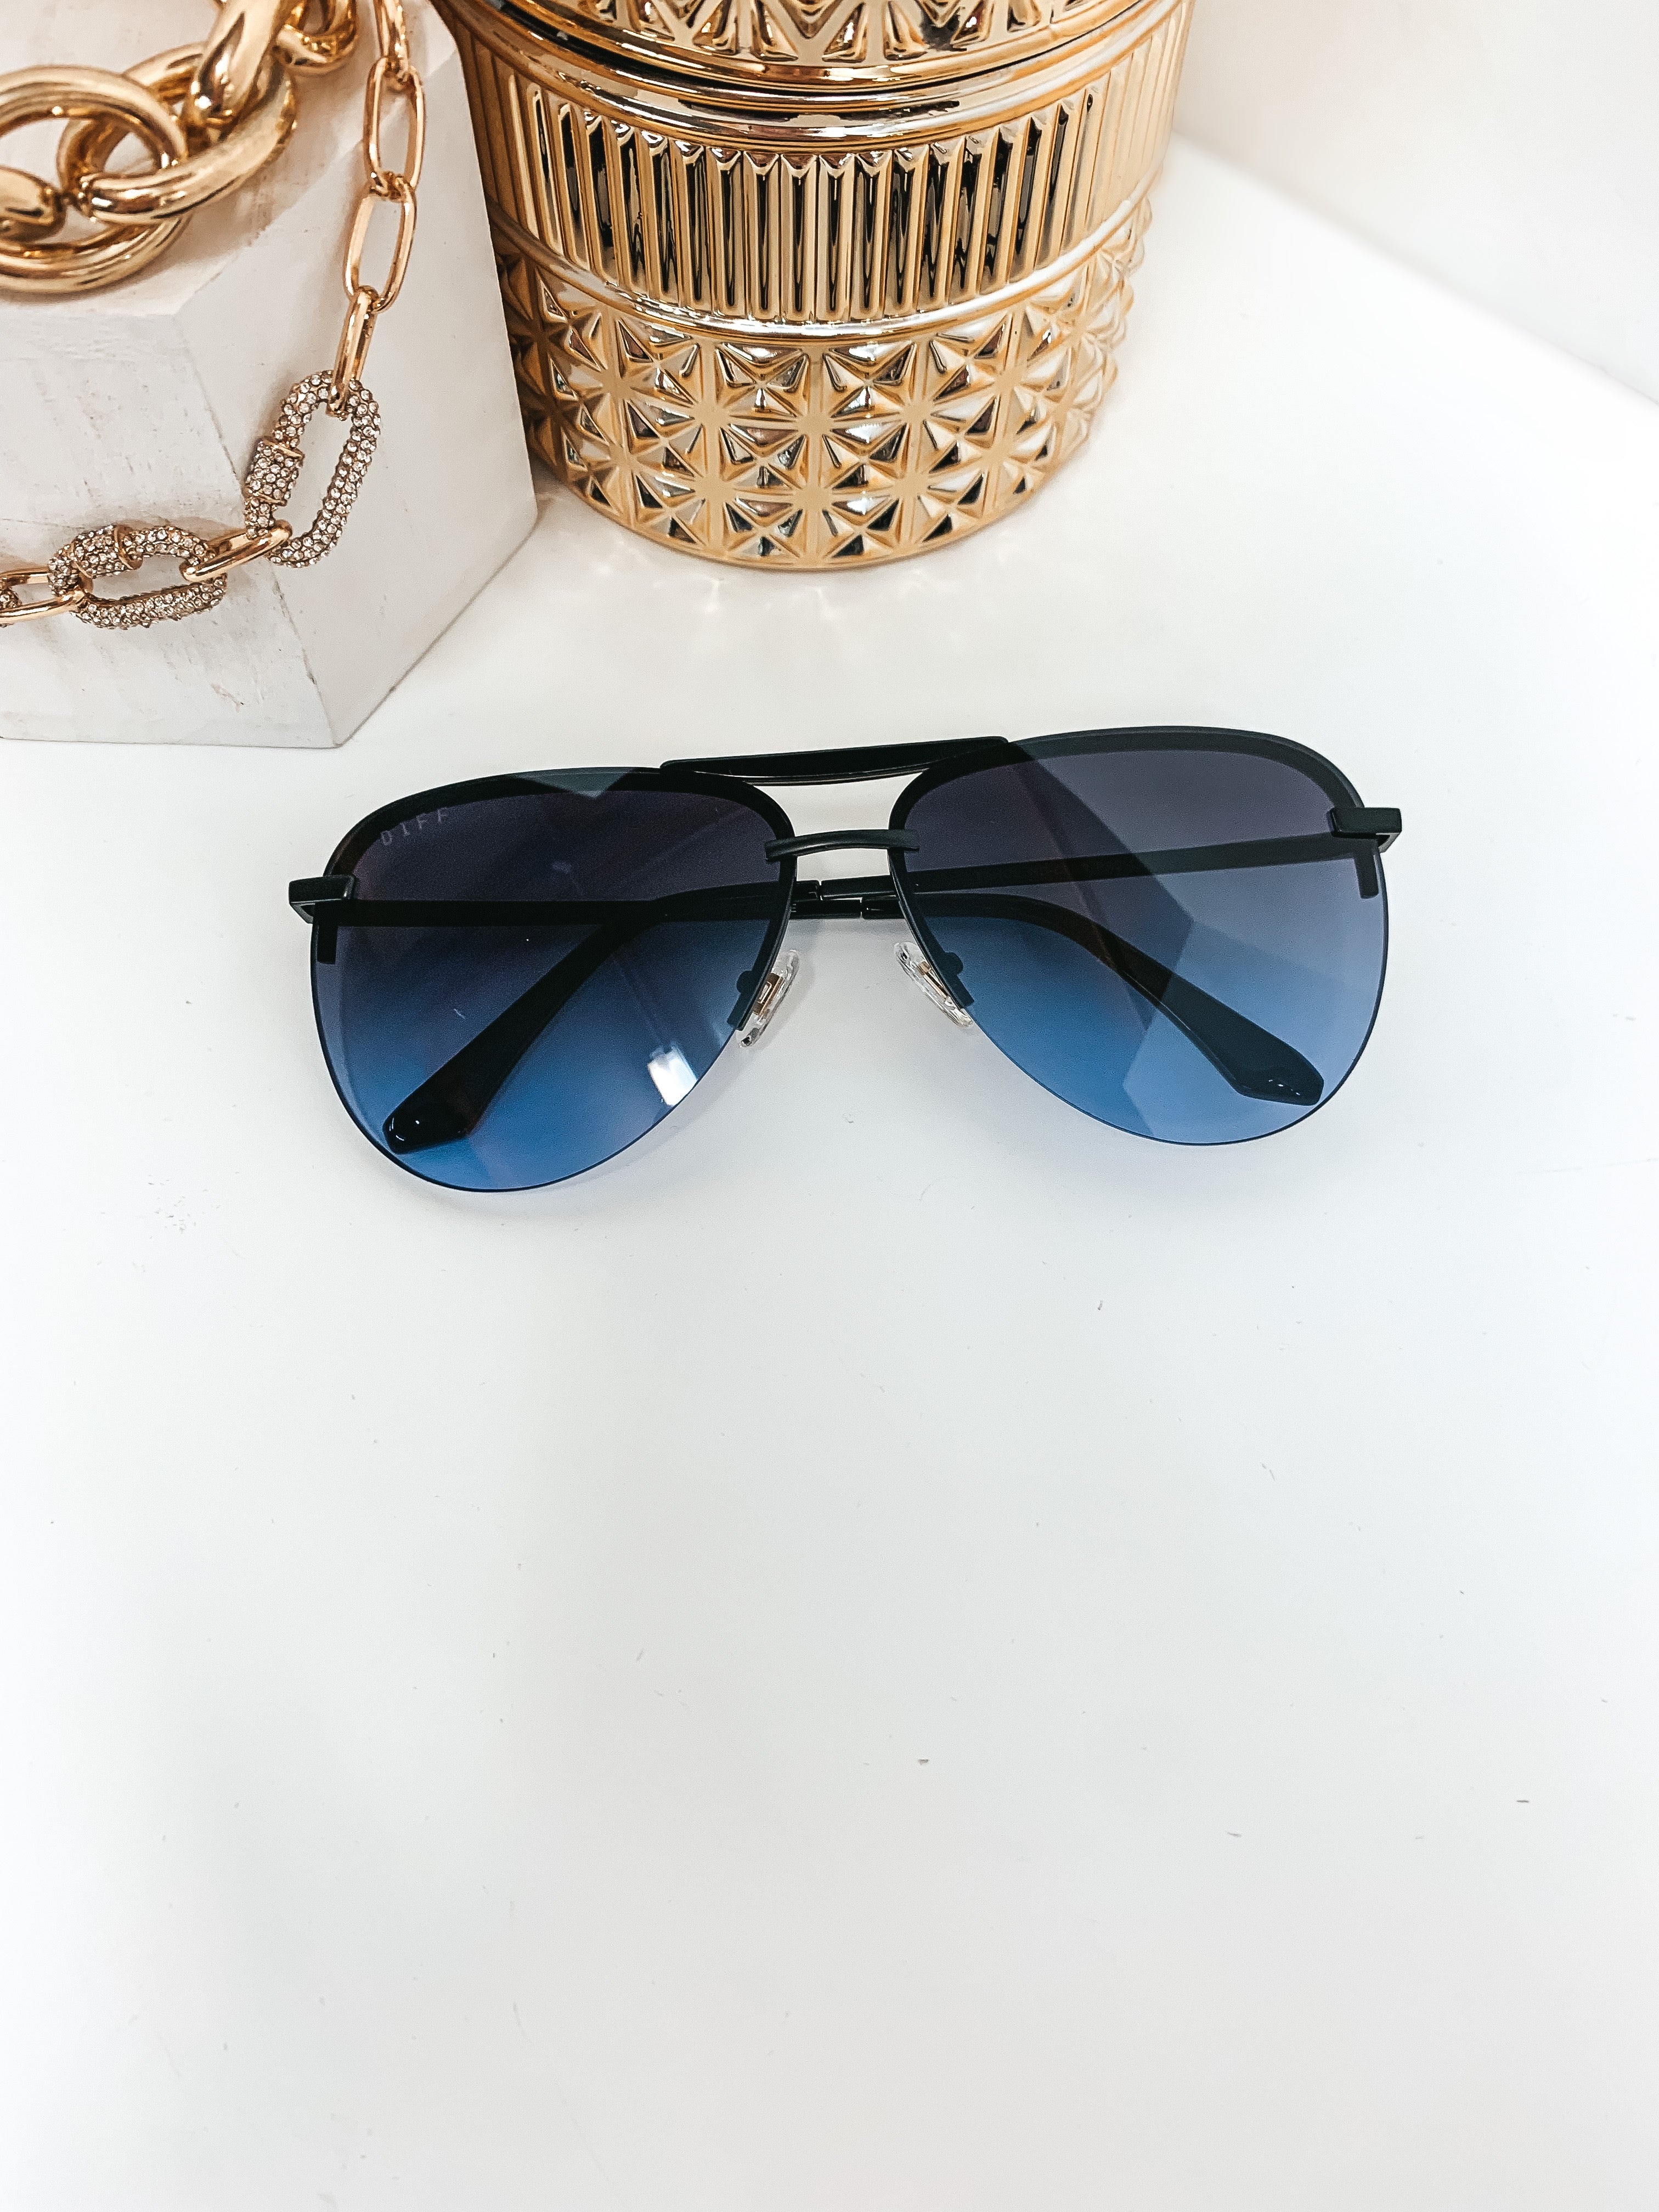 DIFF | Tahoe Blue Gradient Lens Sunglasses in Matte Black - Giddy Up Glamour Boutique